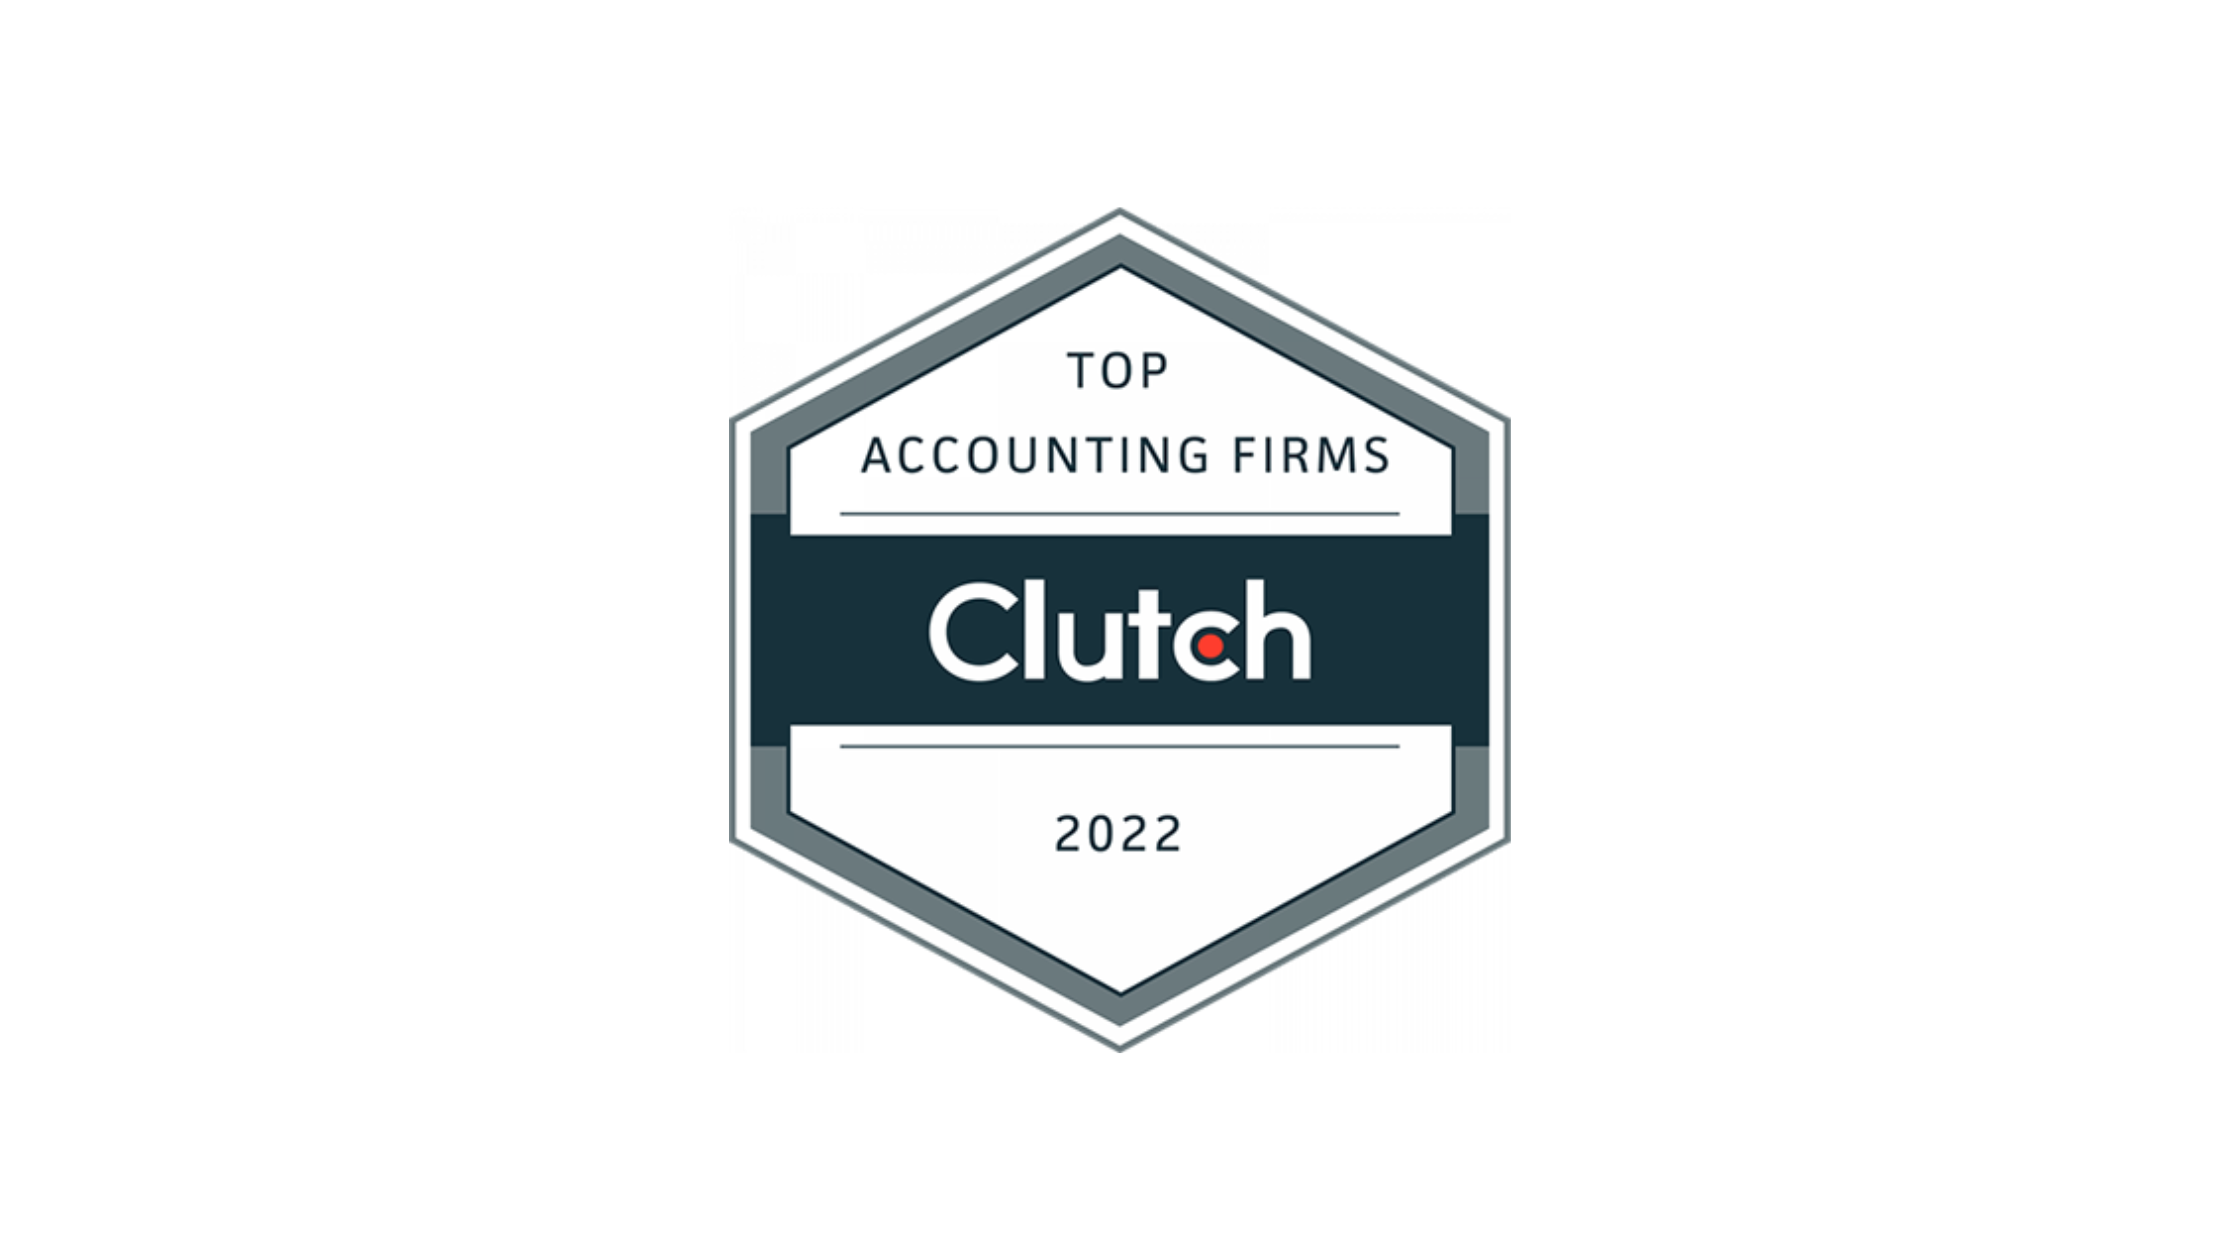 Top Management Accounting Firm in 2022 - Clutch Awards - Avenues Financial